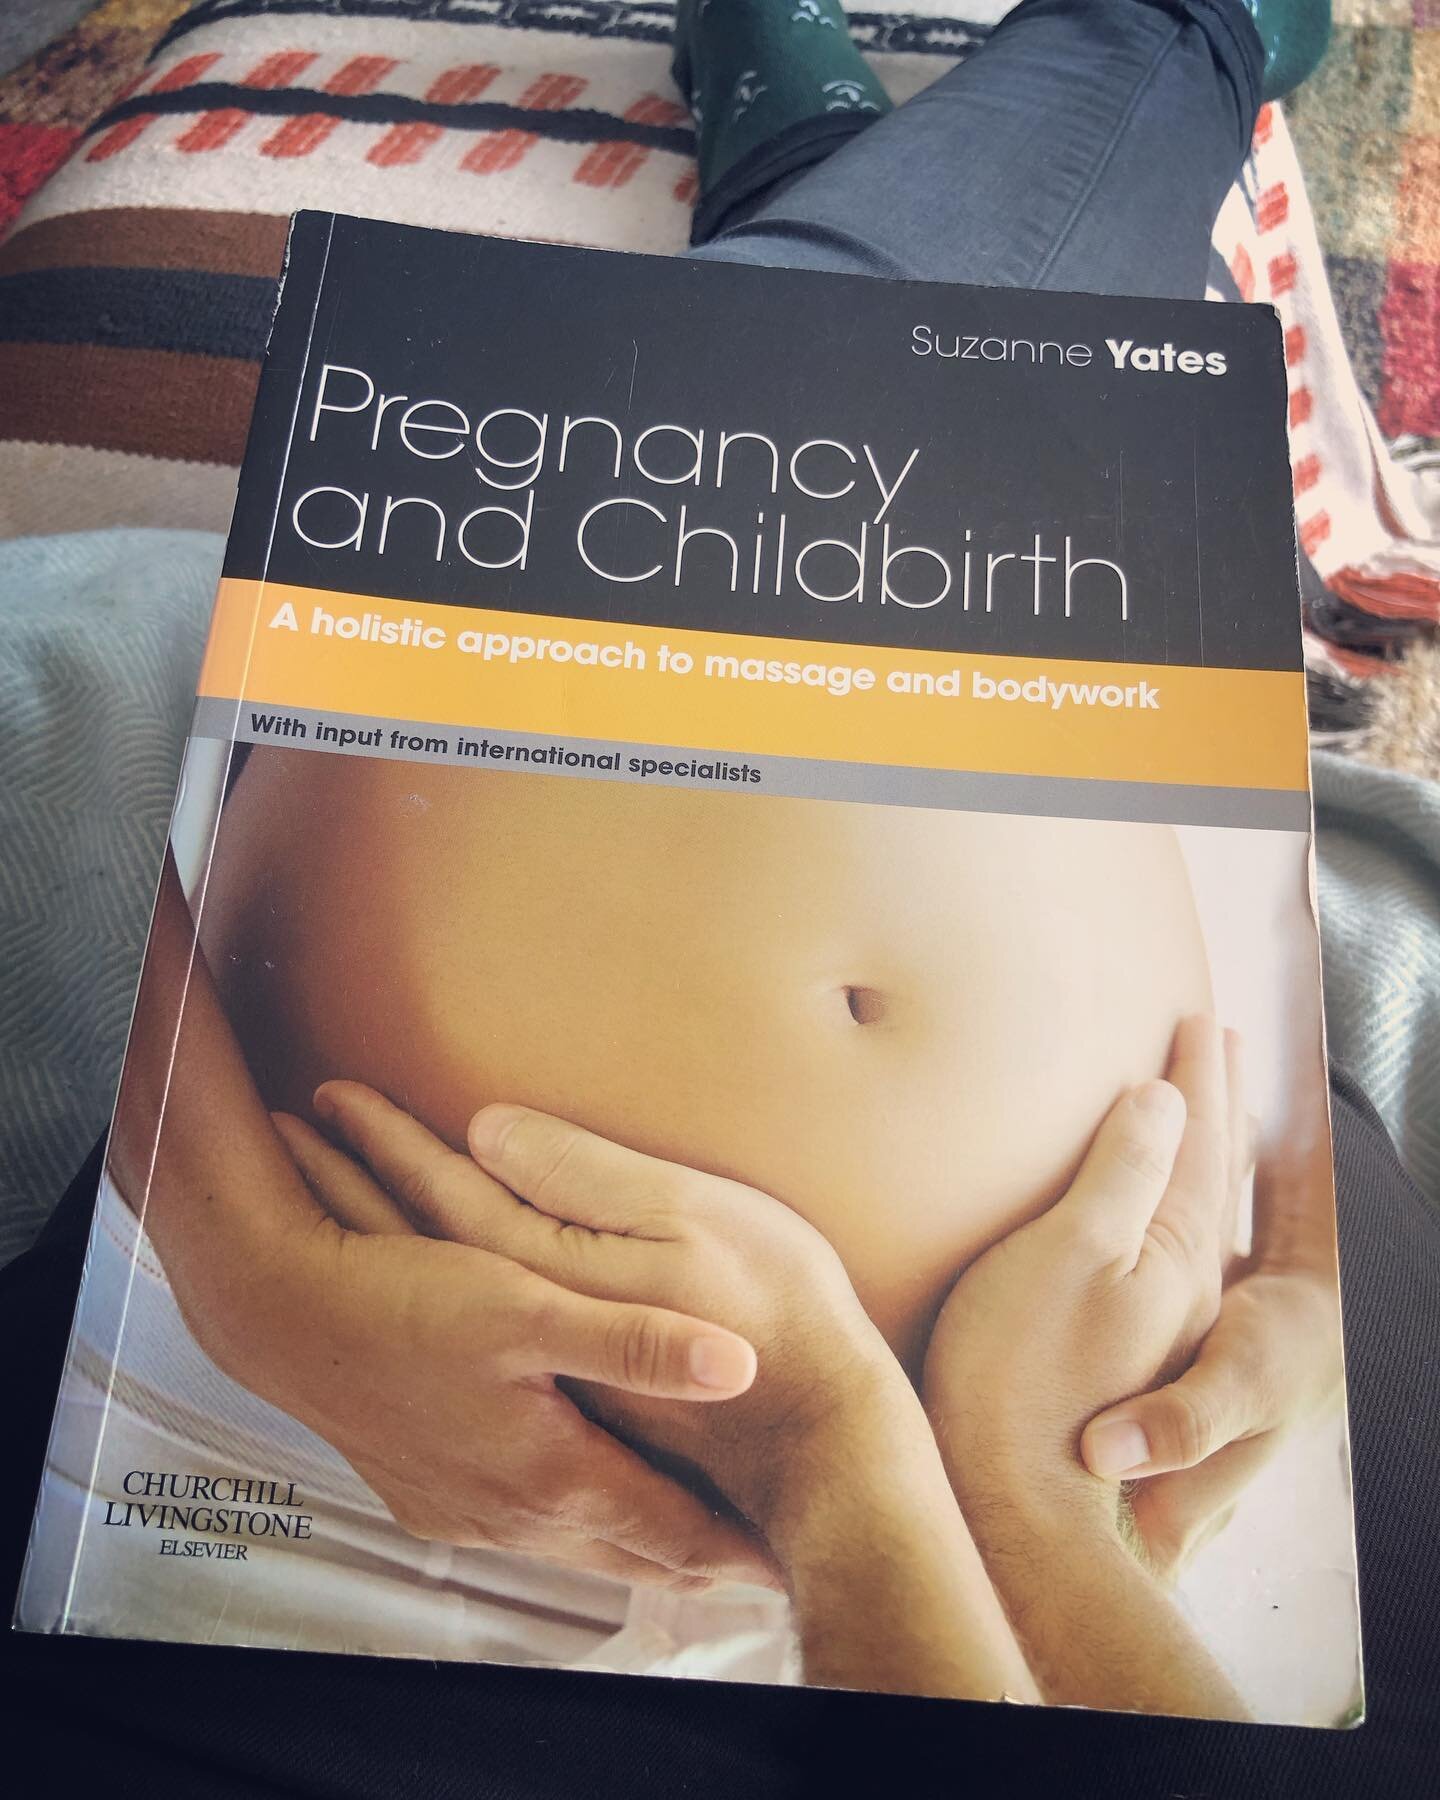 Feet up today to focus on some study - brushing up on western &amp; eastern approaches to pregnancy &amp; discovering new bodywork techniques for expectant &amp; postnatal clients 🤓📖🫄

&ldquo;In our infatuation with modern technological medicine, 